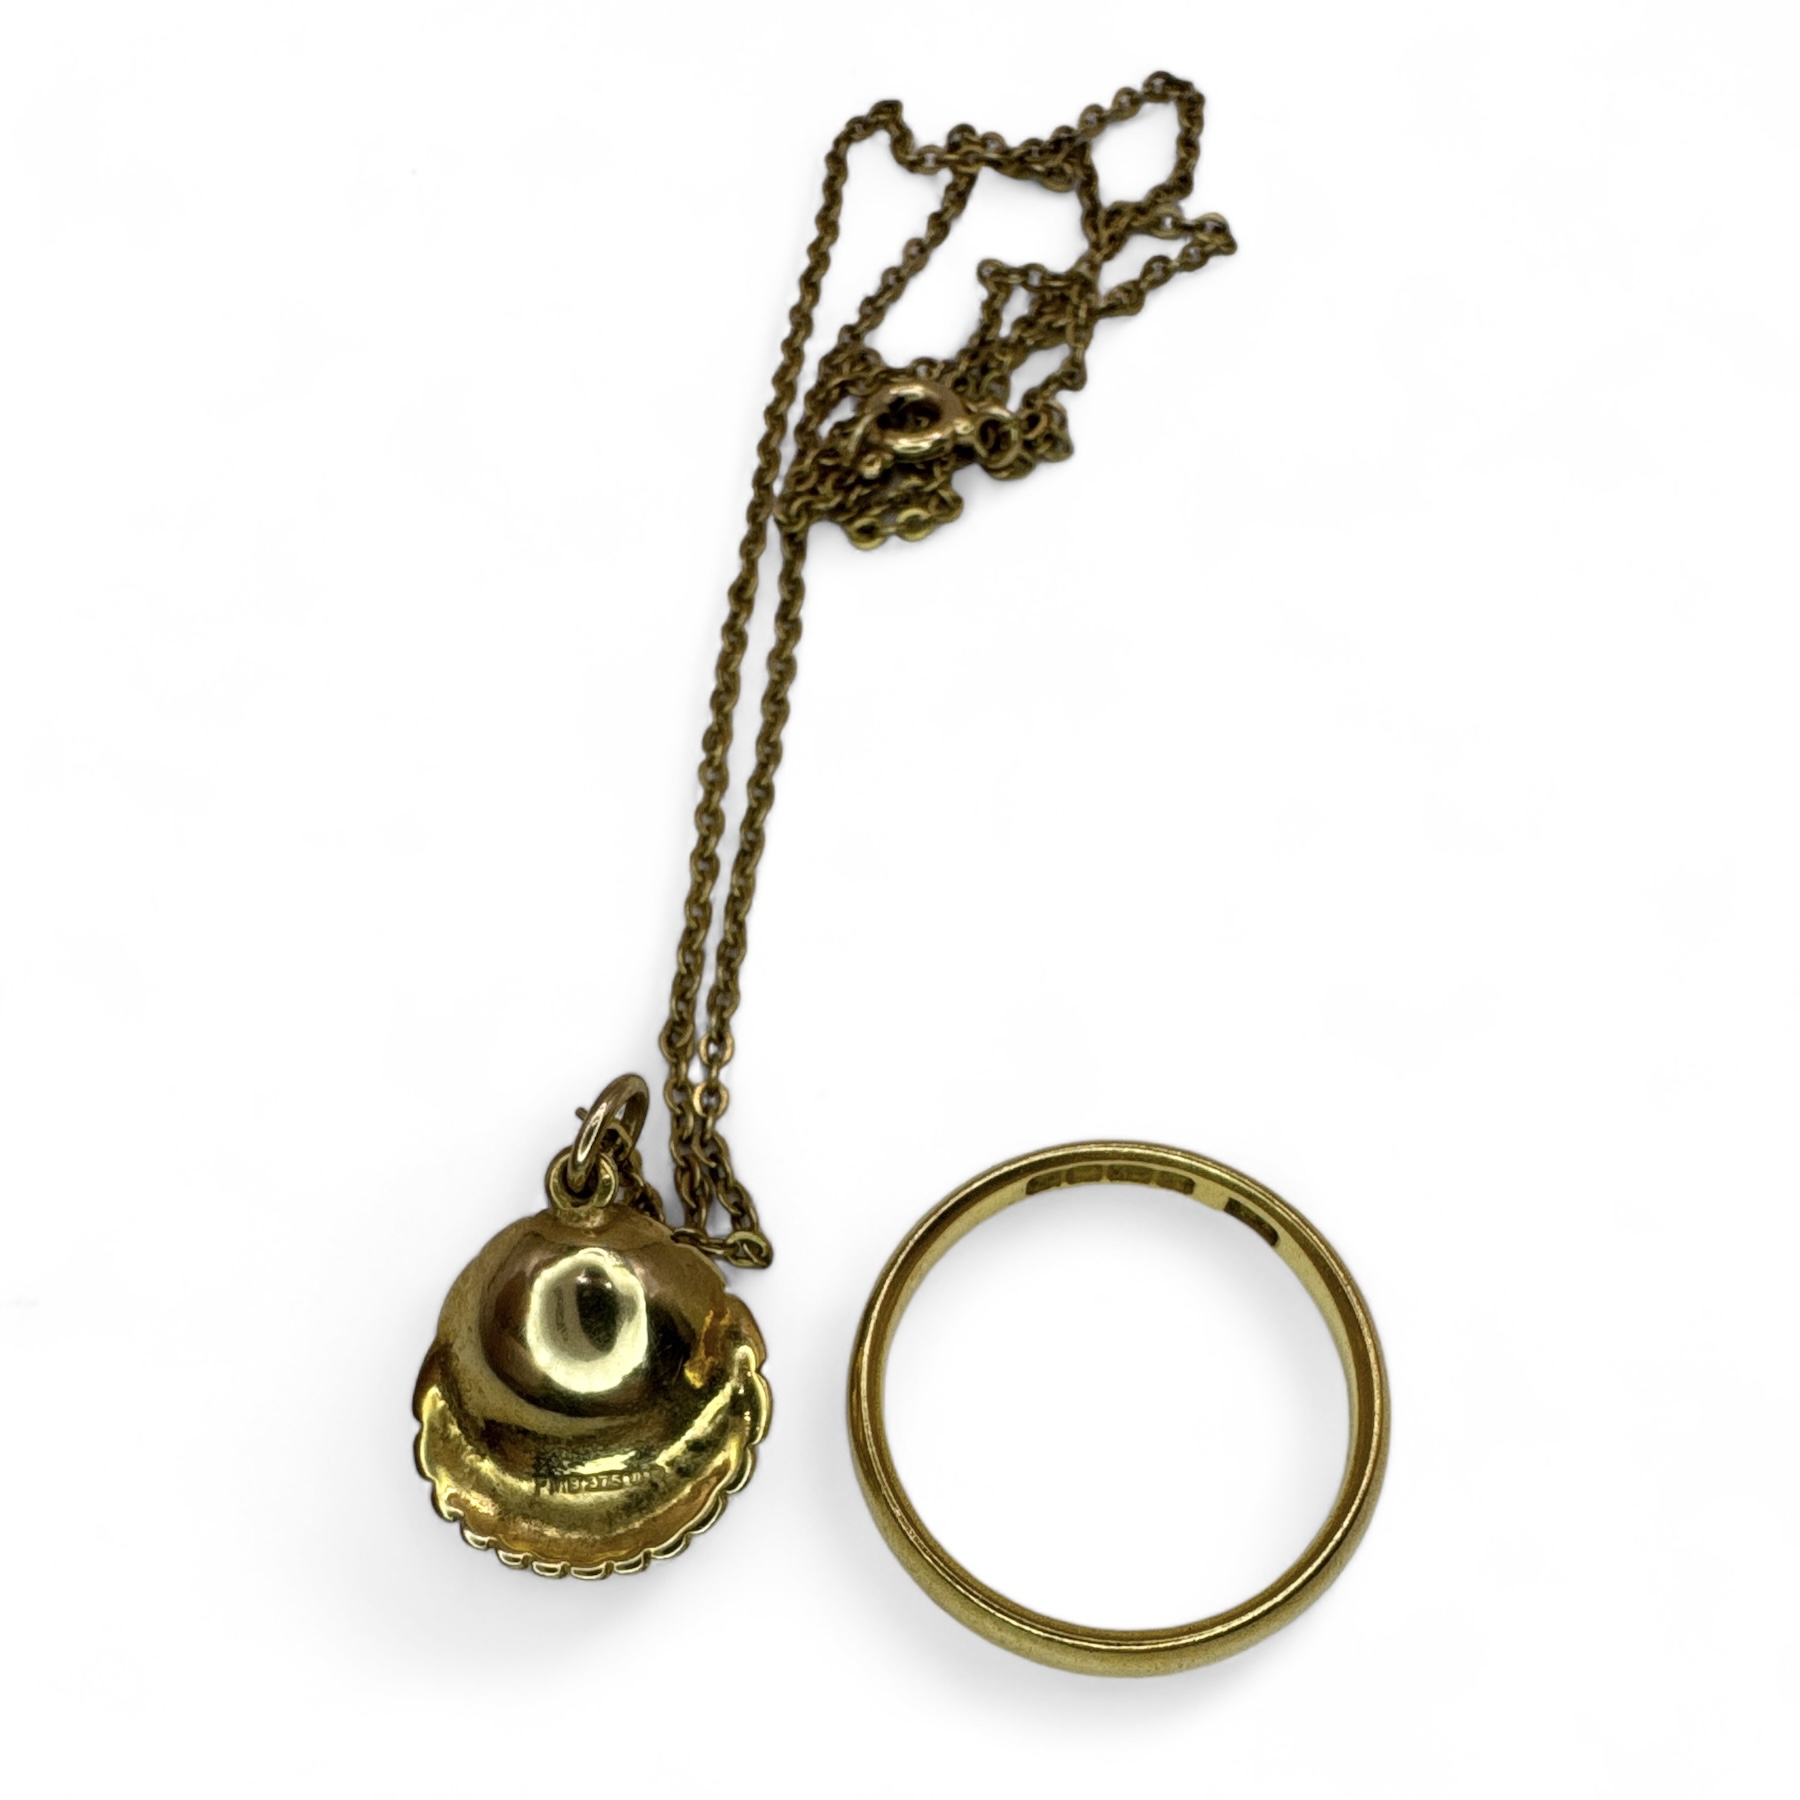 A 22ct gold band ring along with a cultured pearl set scallop shell pendant in 9ct gold on a 9ct - Bild 2 aus 2